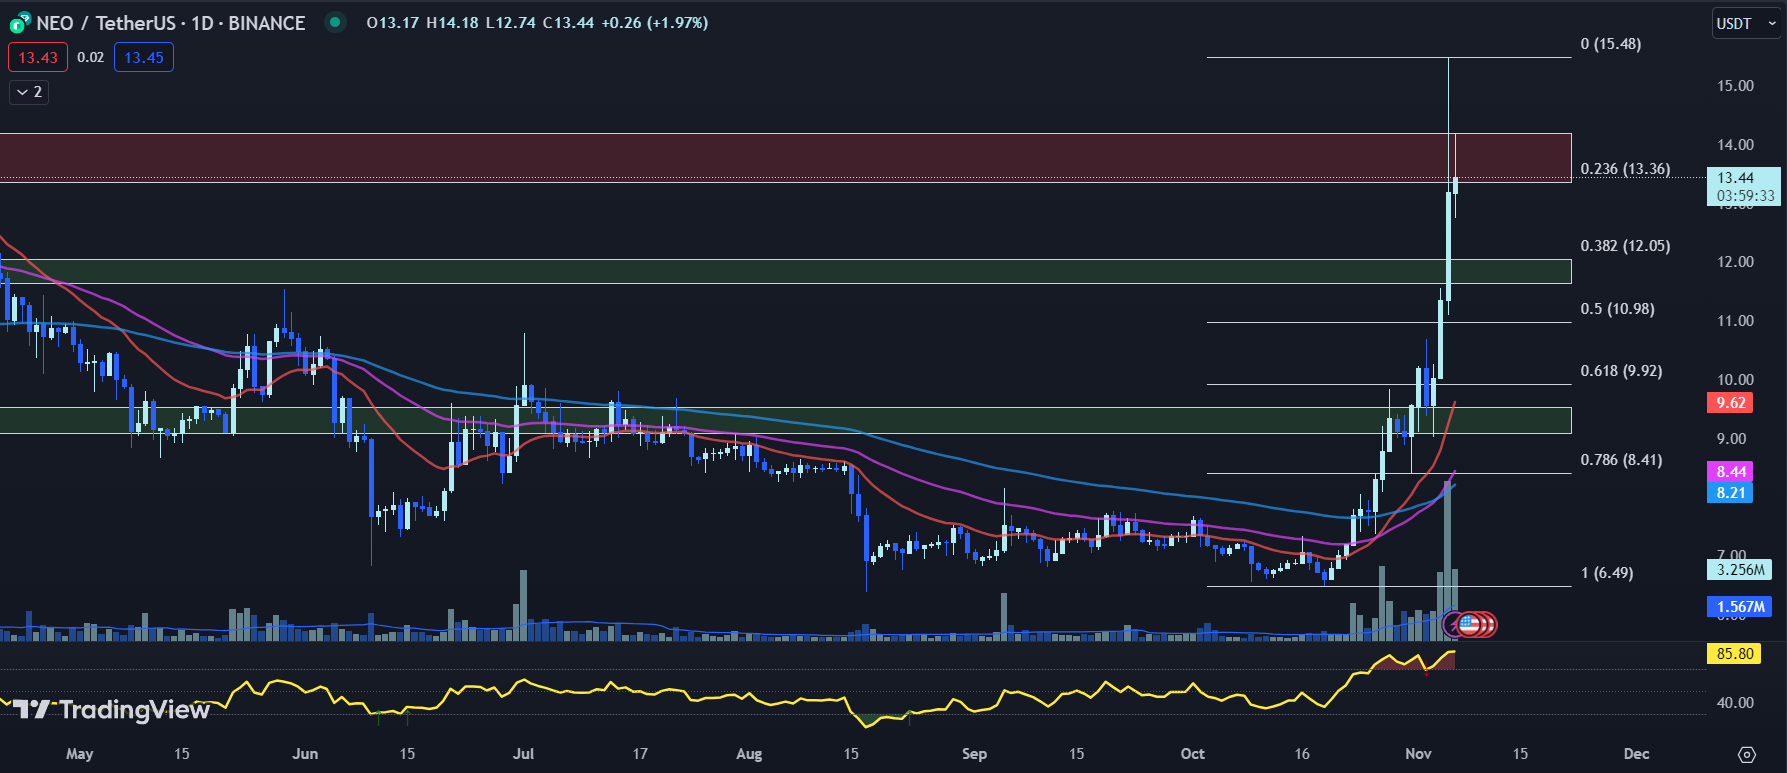 tradingview chart for the NEO price 11-06-23